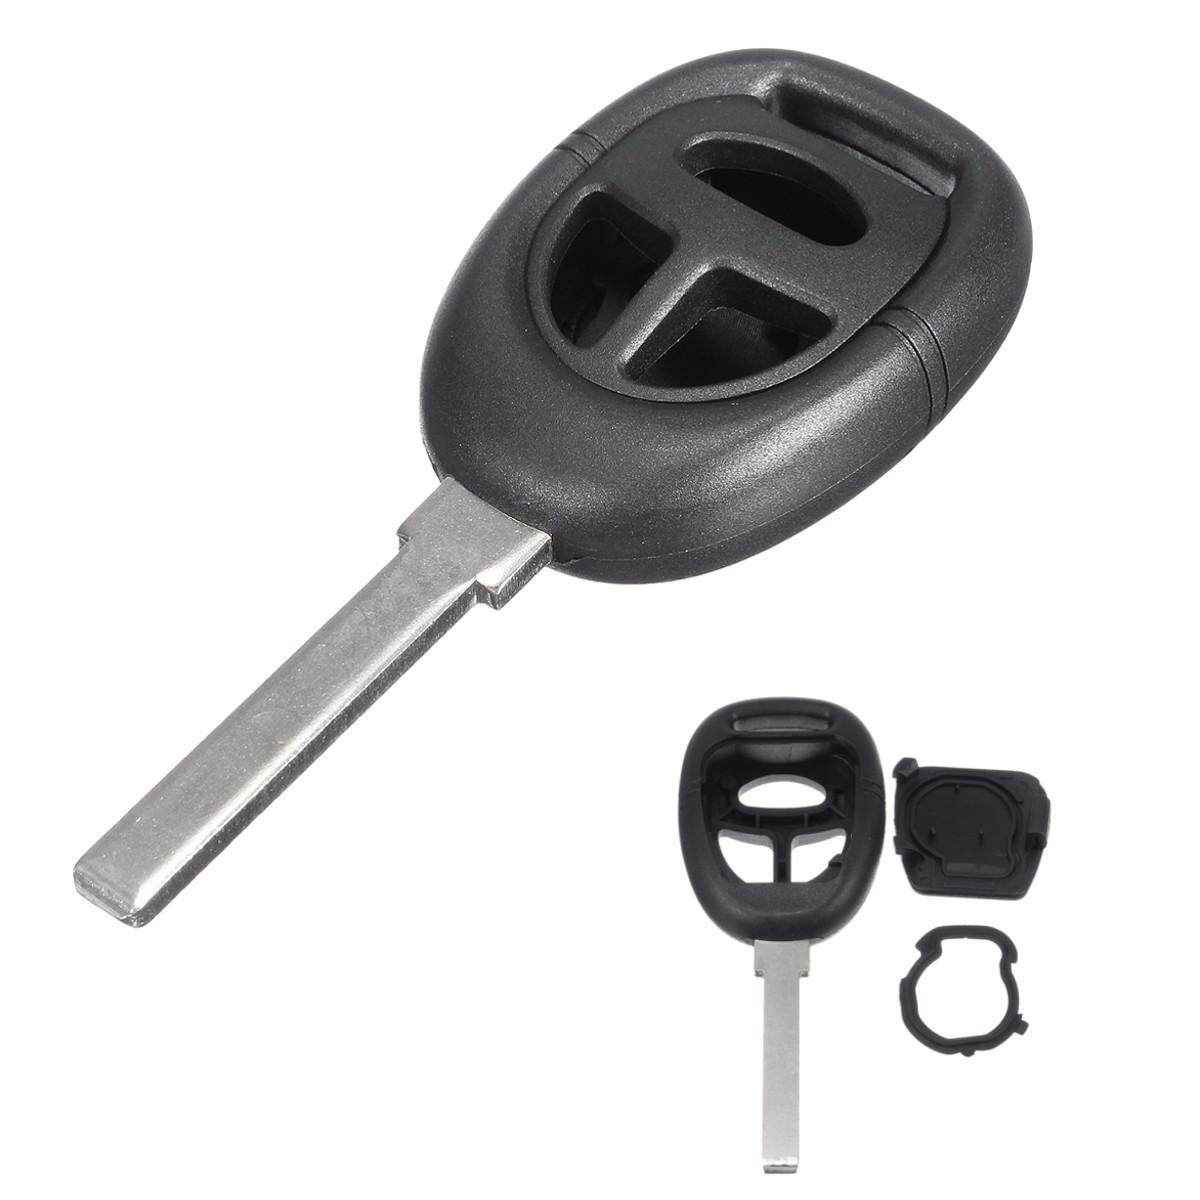 Remote Key Fob Shell Case w/ Blank Blade Replacement Kit for SAAB 9-3 9-5